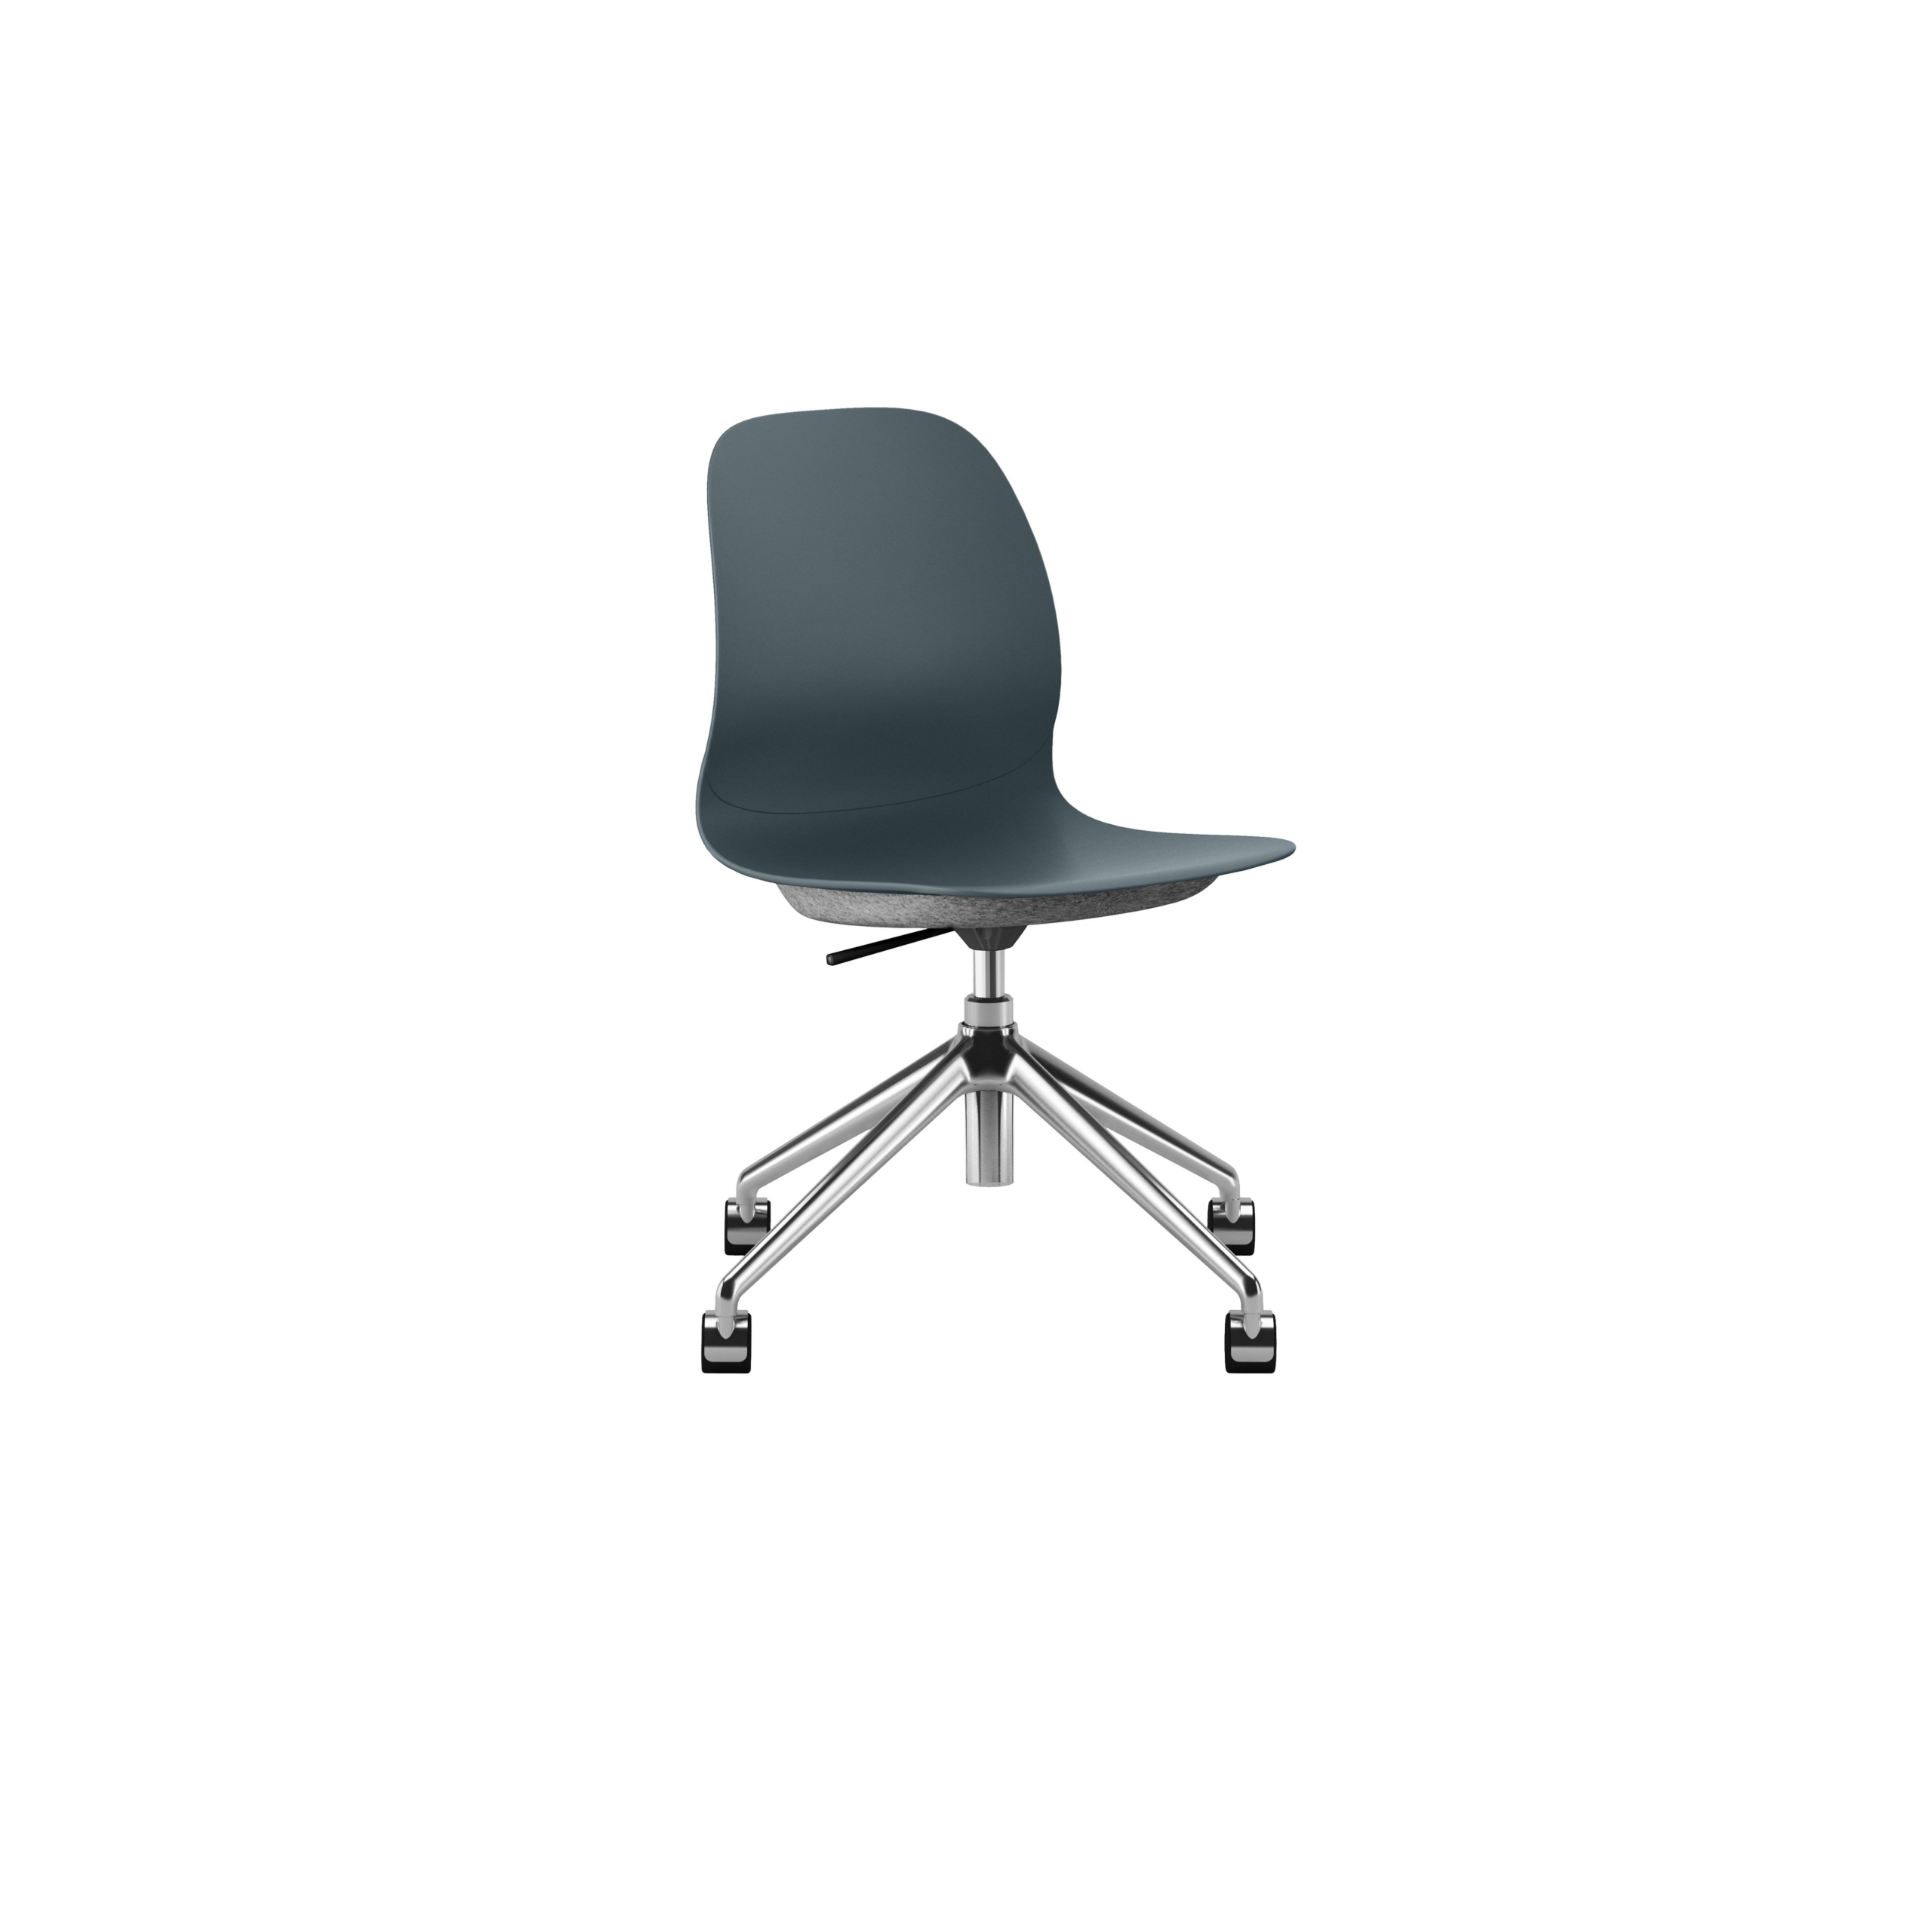 Archie Chair with swivel base